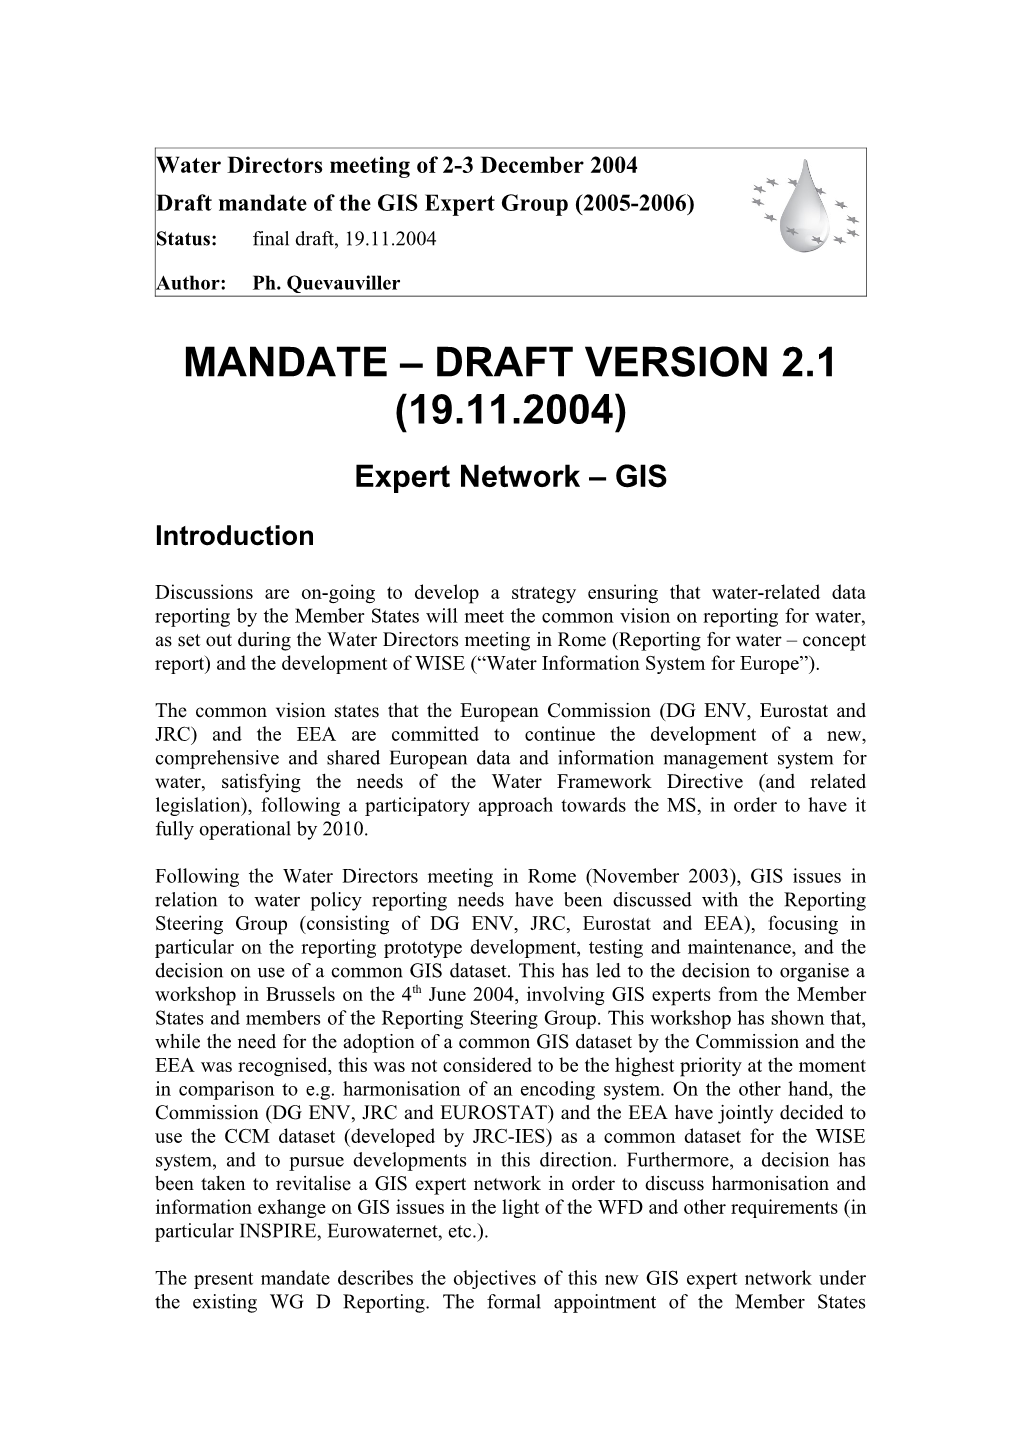 Draft Mandate of the GIS Expert Group (2005-2006)